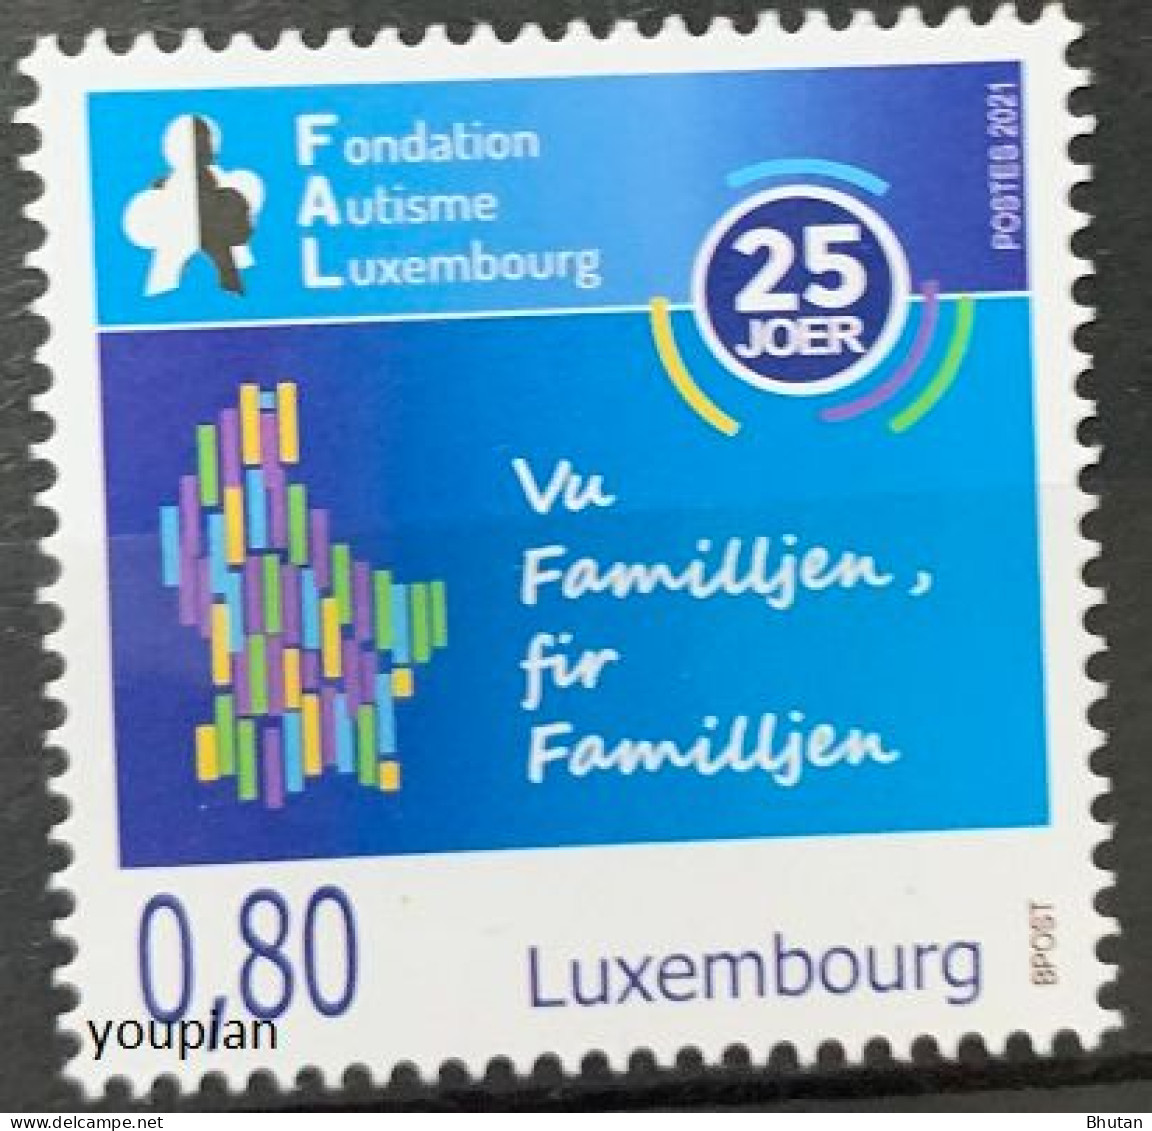 Luxembourg 2021, 25 Years Foundation Autism Luxembourg, MNH Single Stamp - Neufs